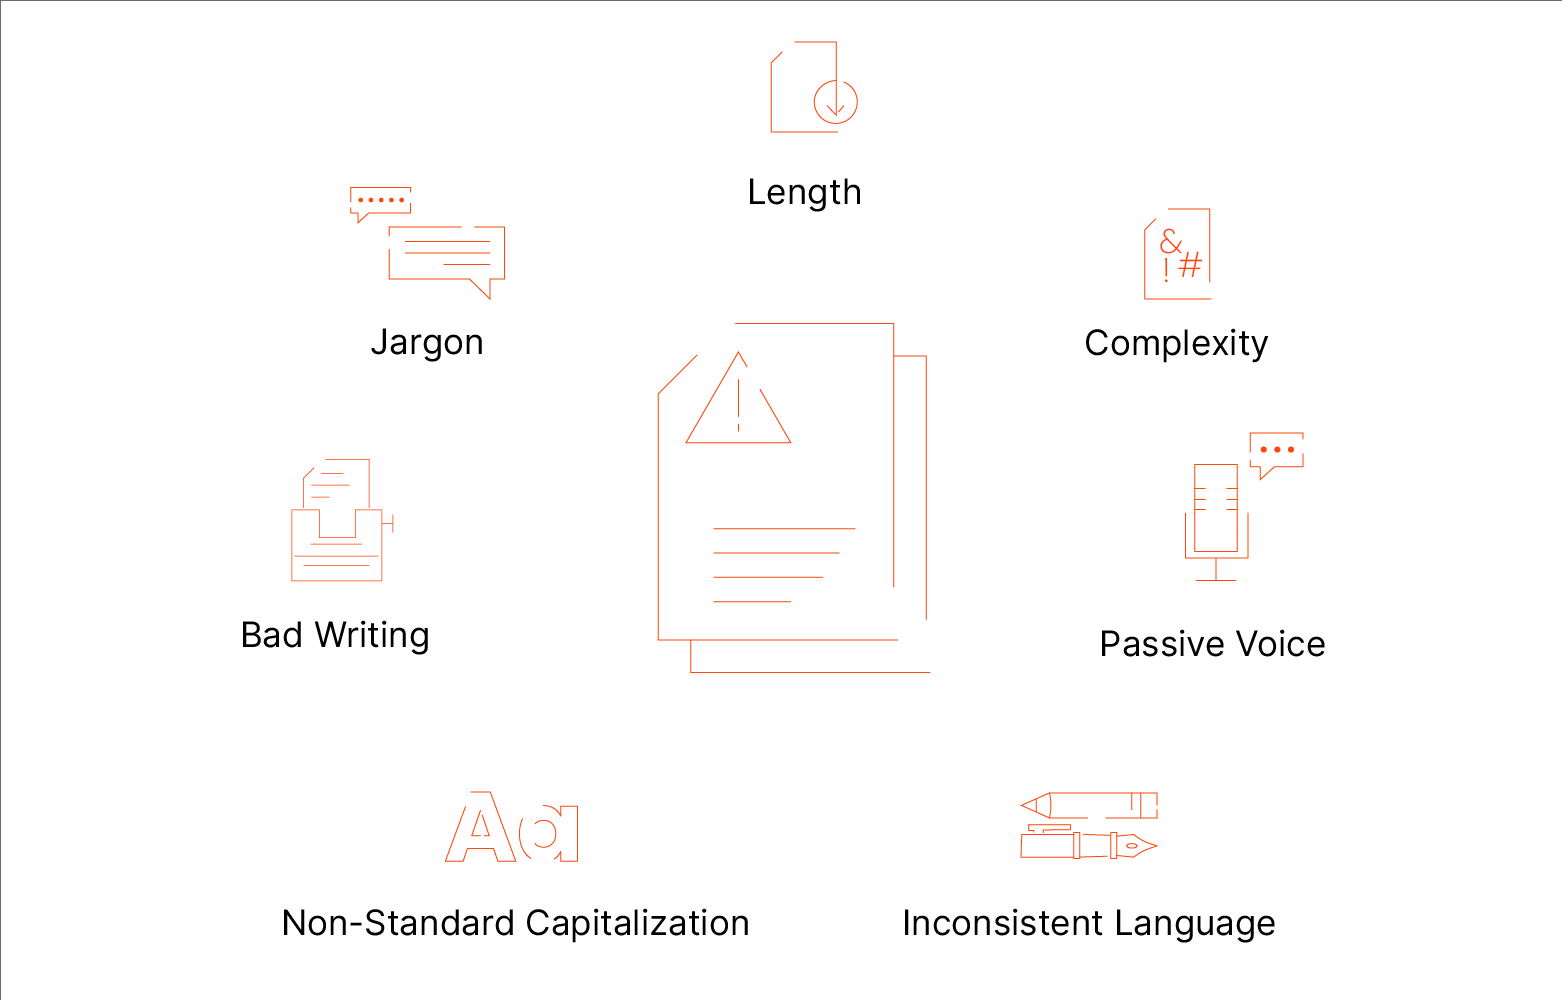 NLP for contracts improving how documents are read and processed to streamline the contract management process. Contract surrounded by icons with text highlighting why contract are hard to read: Length, complexity, passive voice, inconsistent language, non-standard capitalization, bad writing, jargon, and length.